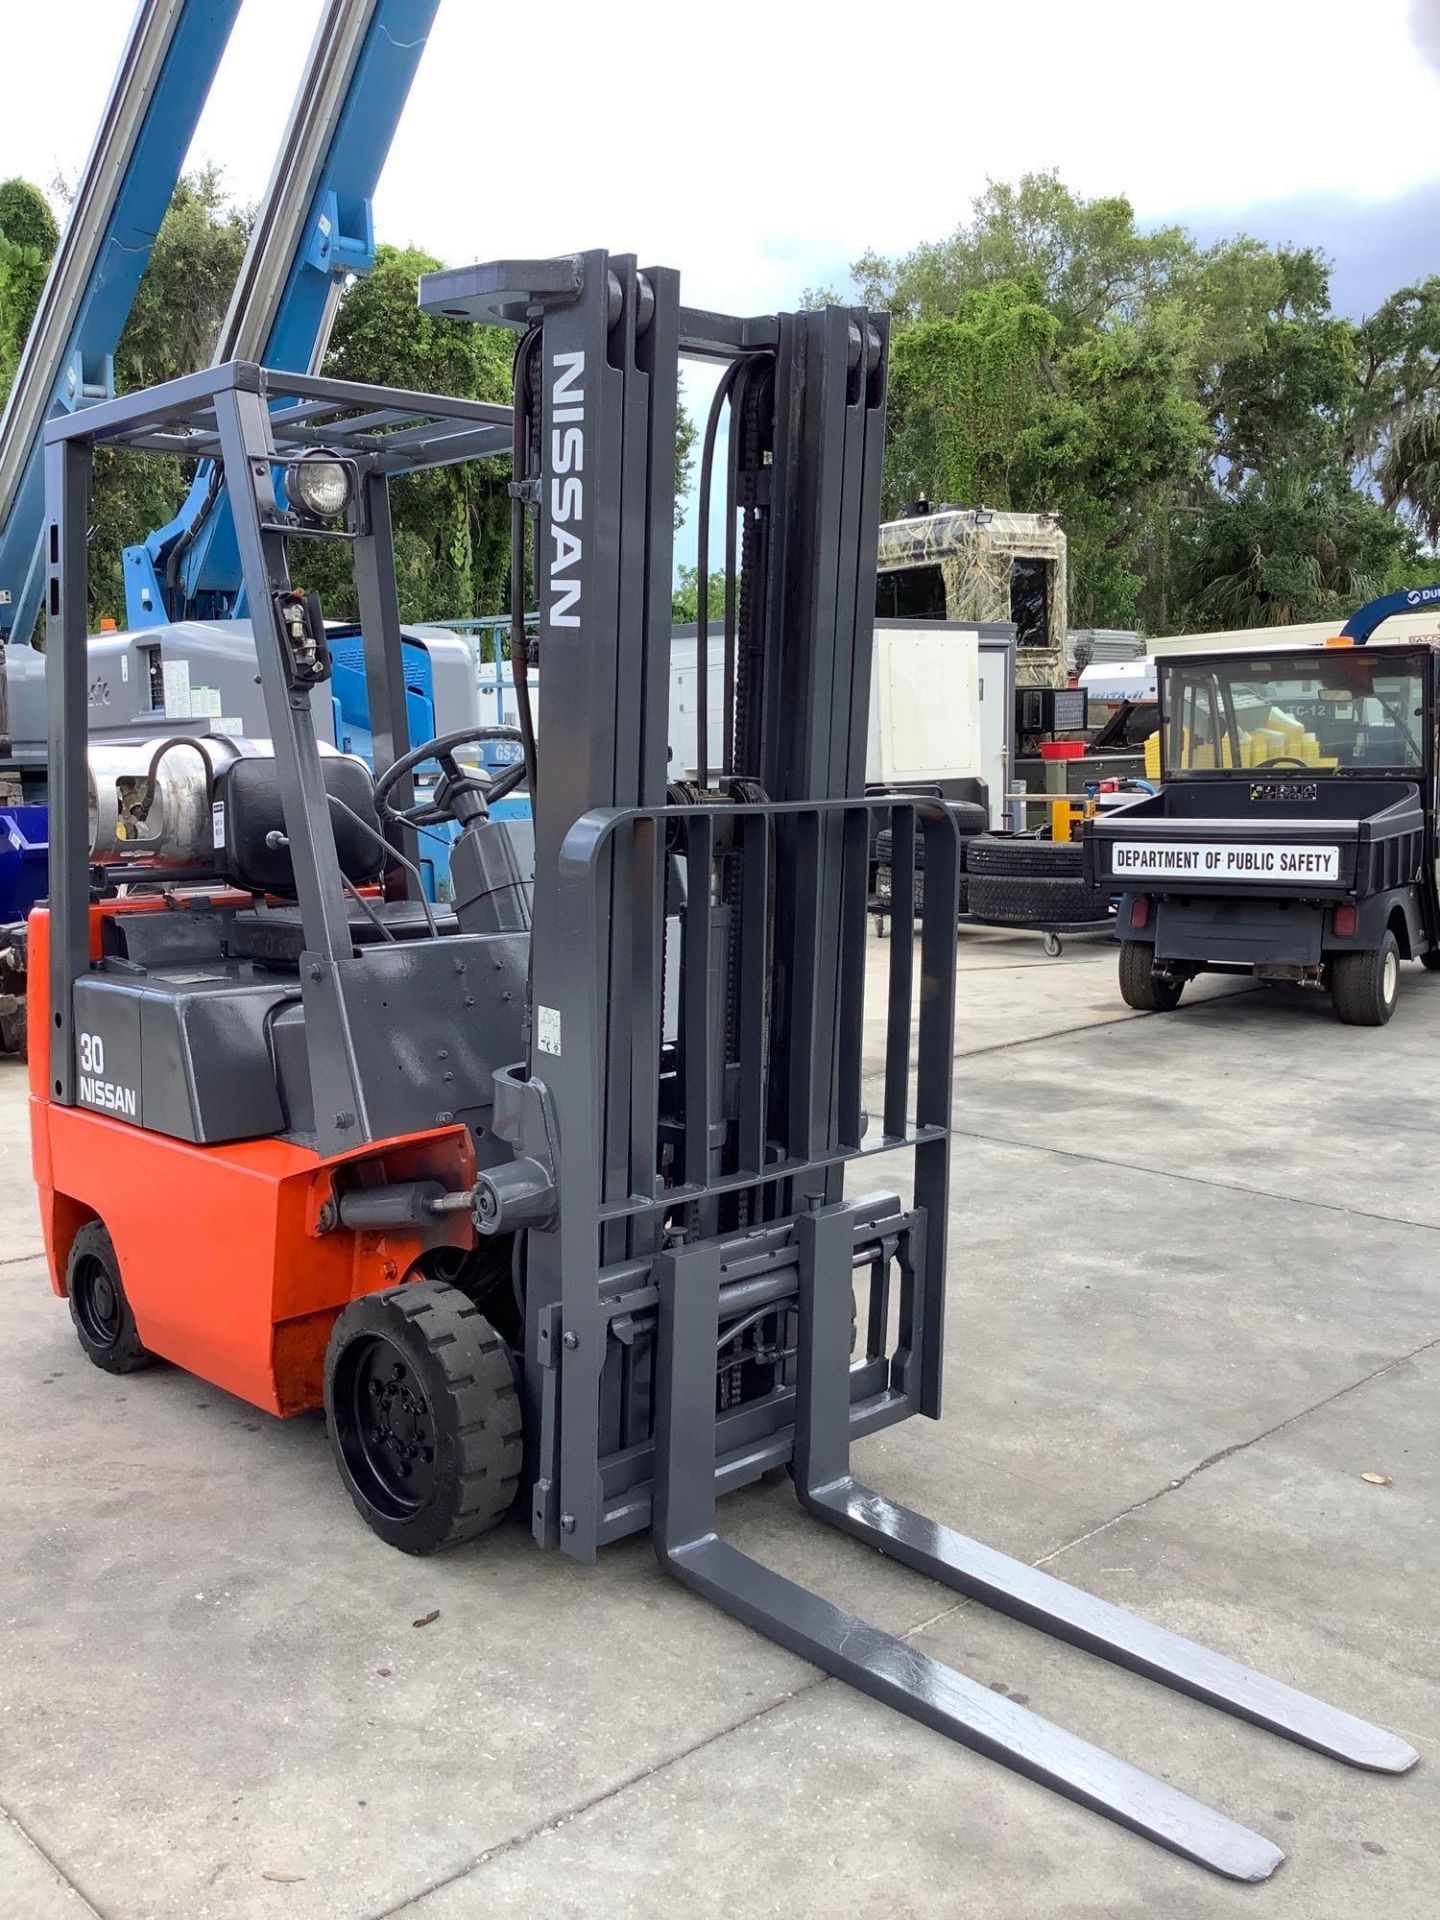 NISSAN OPTIMUM 30 FORKLIFT MODEL CPJ01A15PV, LP POWERED, APPROX MAX CAPACITY 3000LBS, APPROX MAX HEI - Image 11 of 17